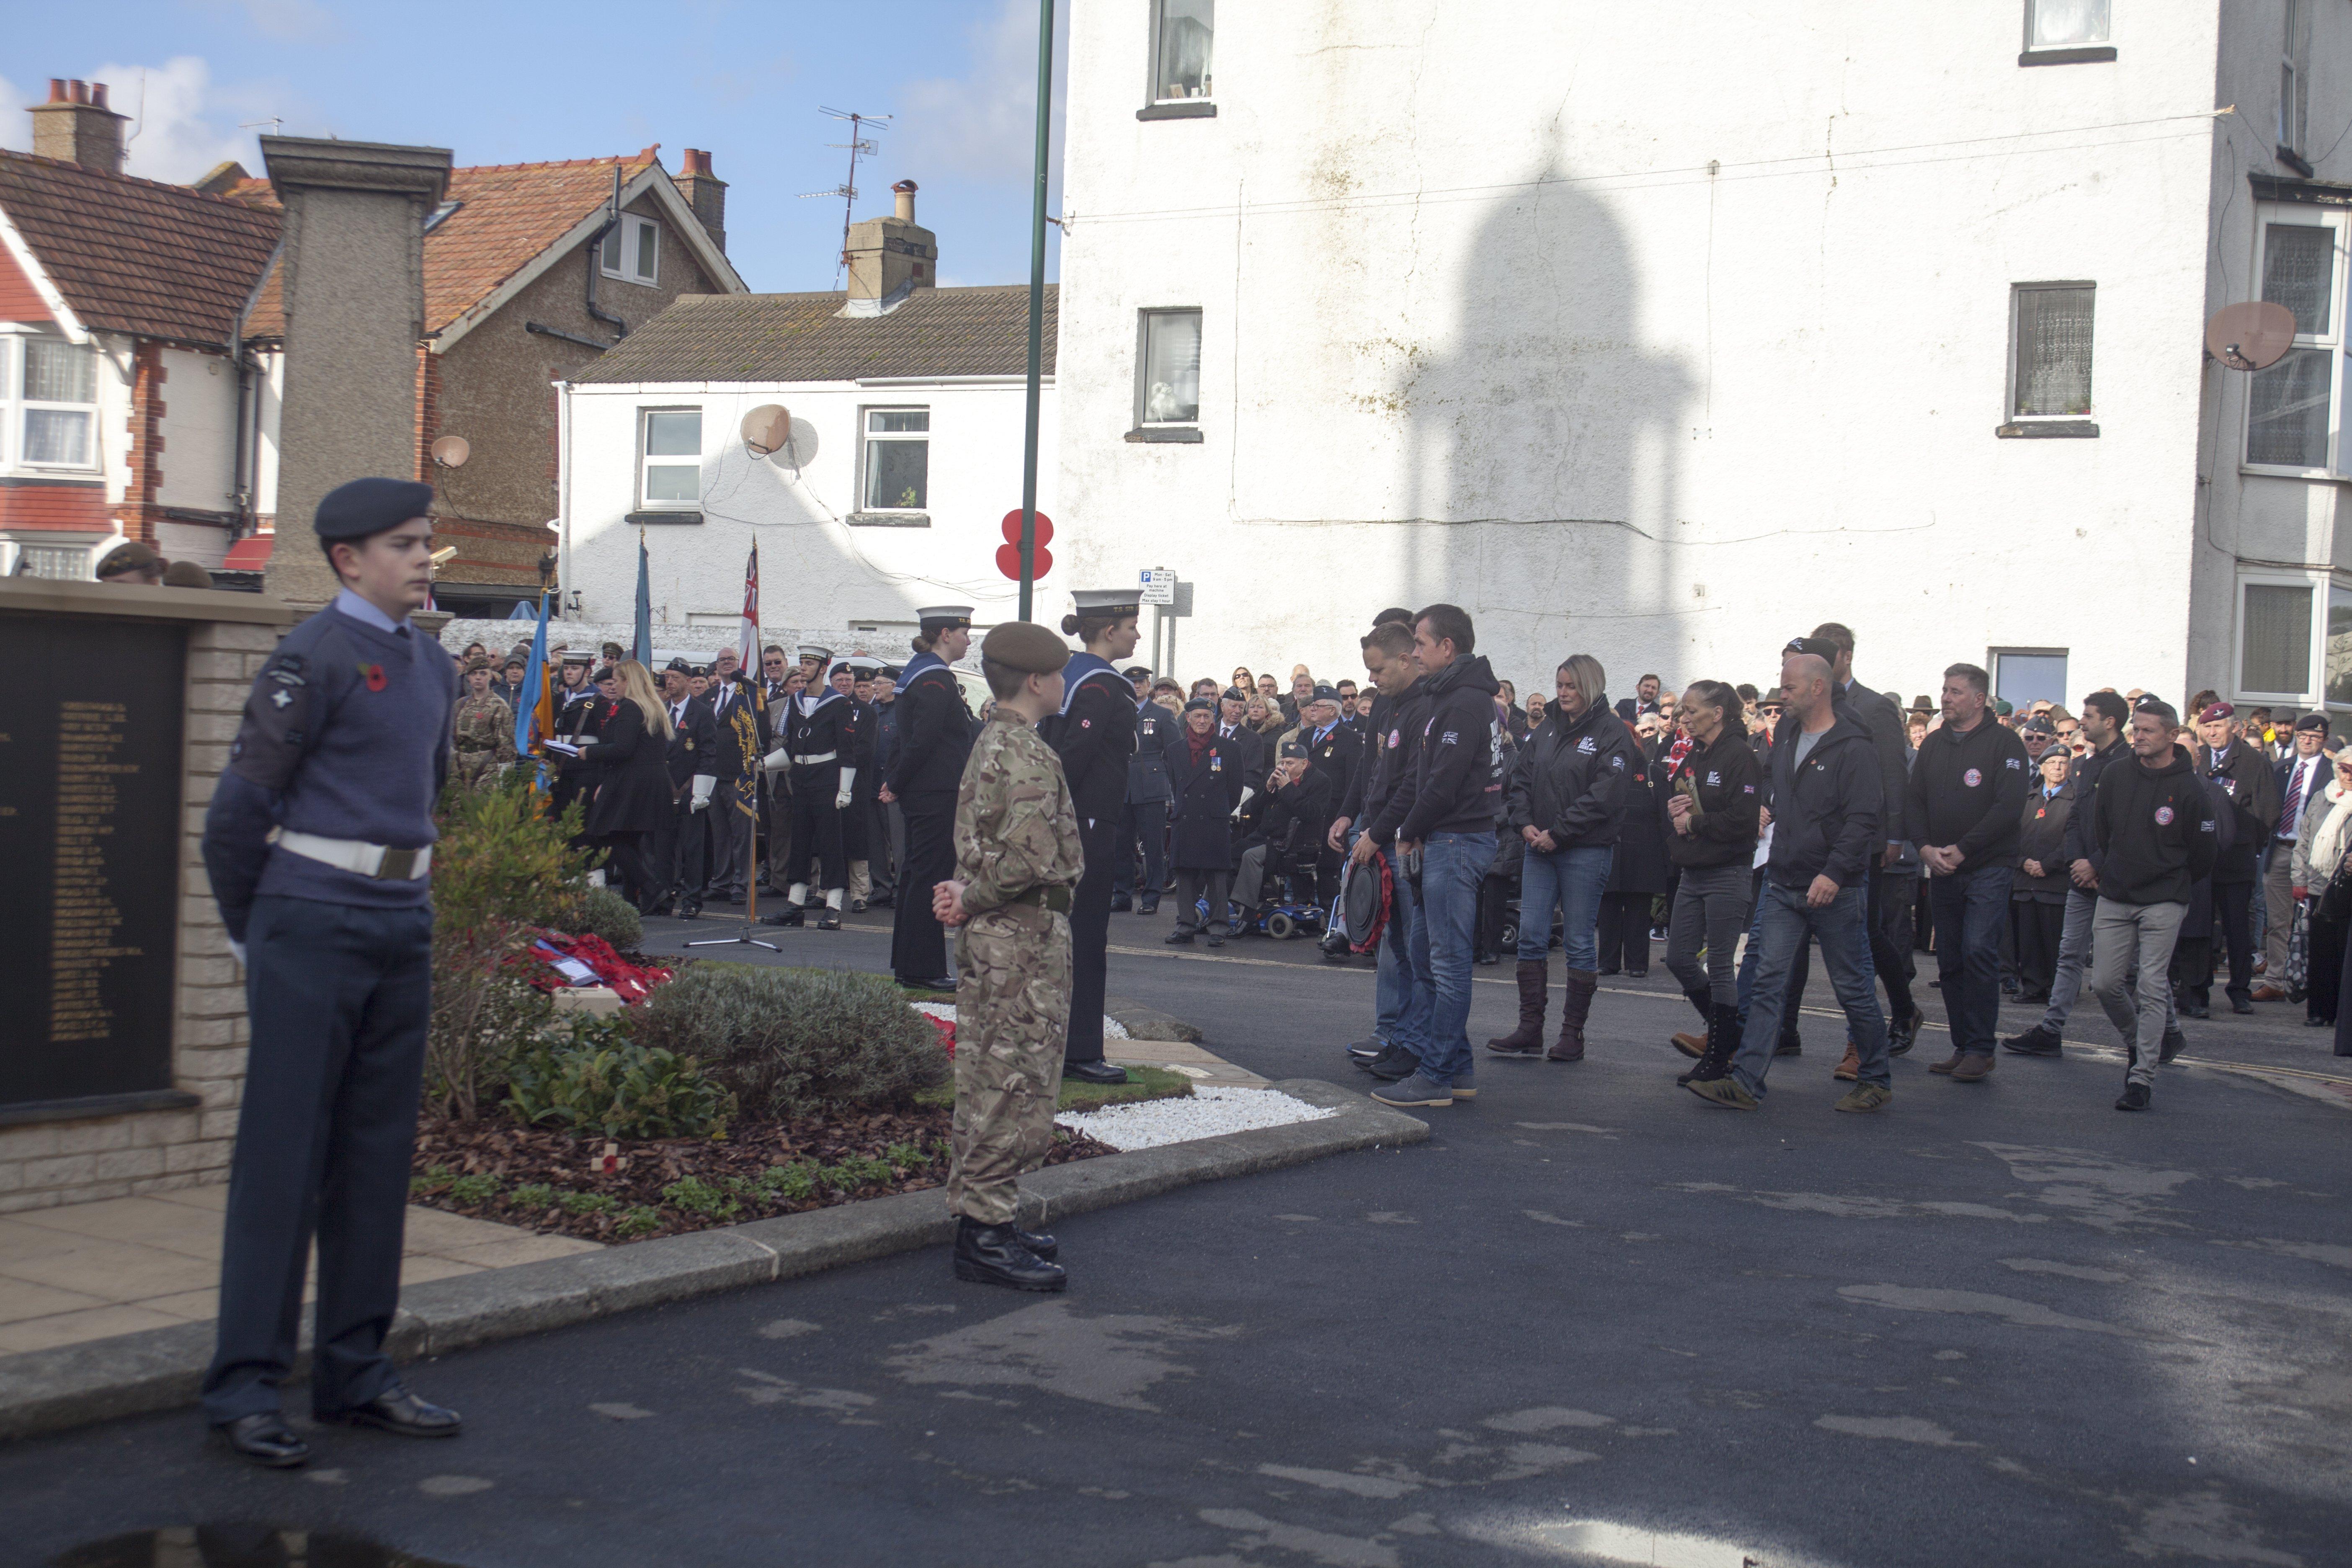 All Call Signs Lay their wreath
photo courtsey of Chris Moran